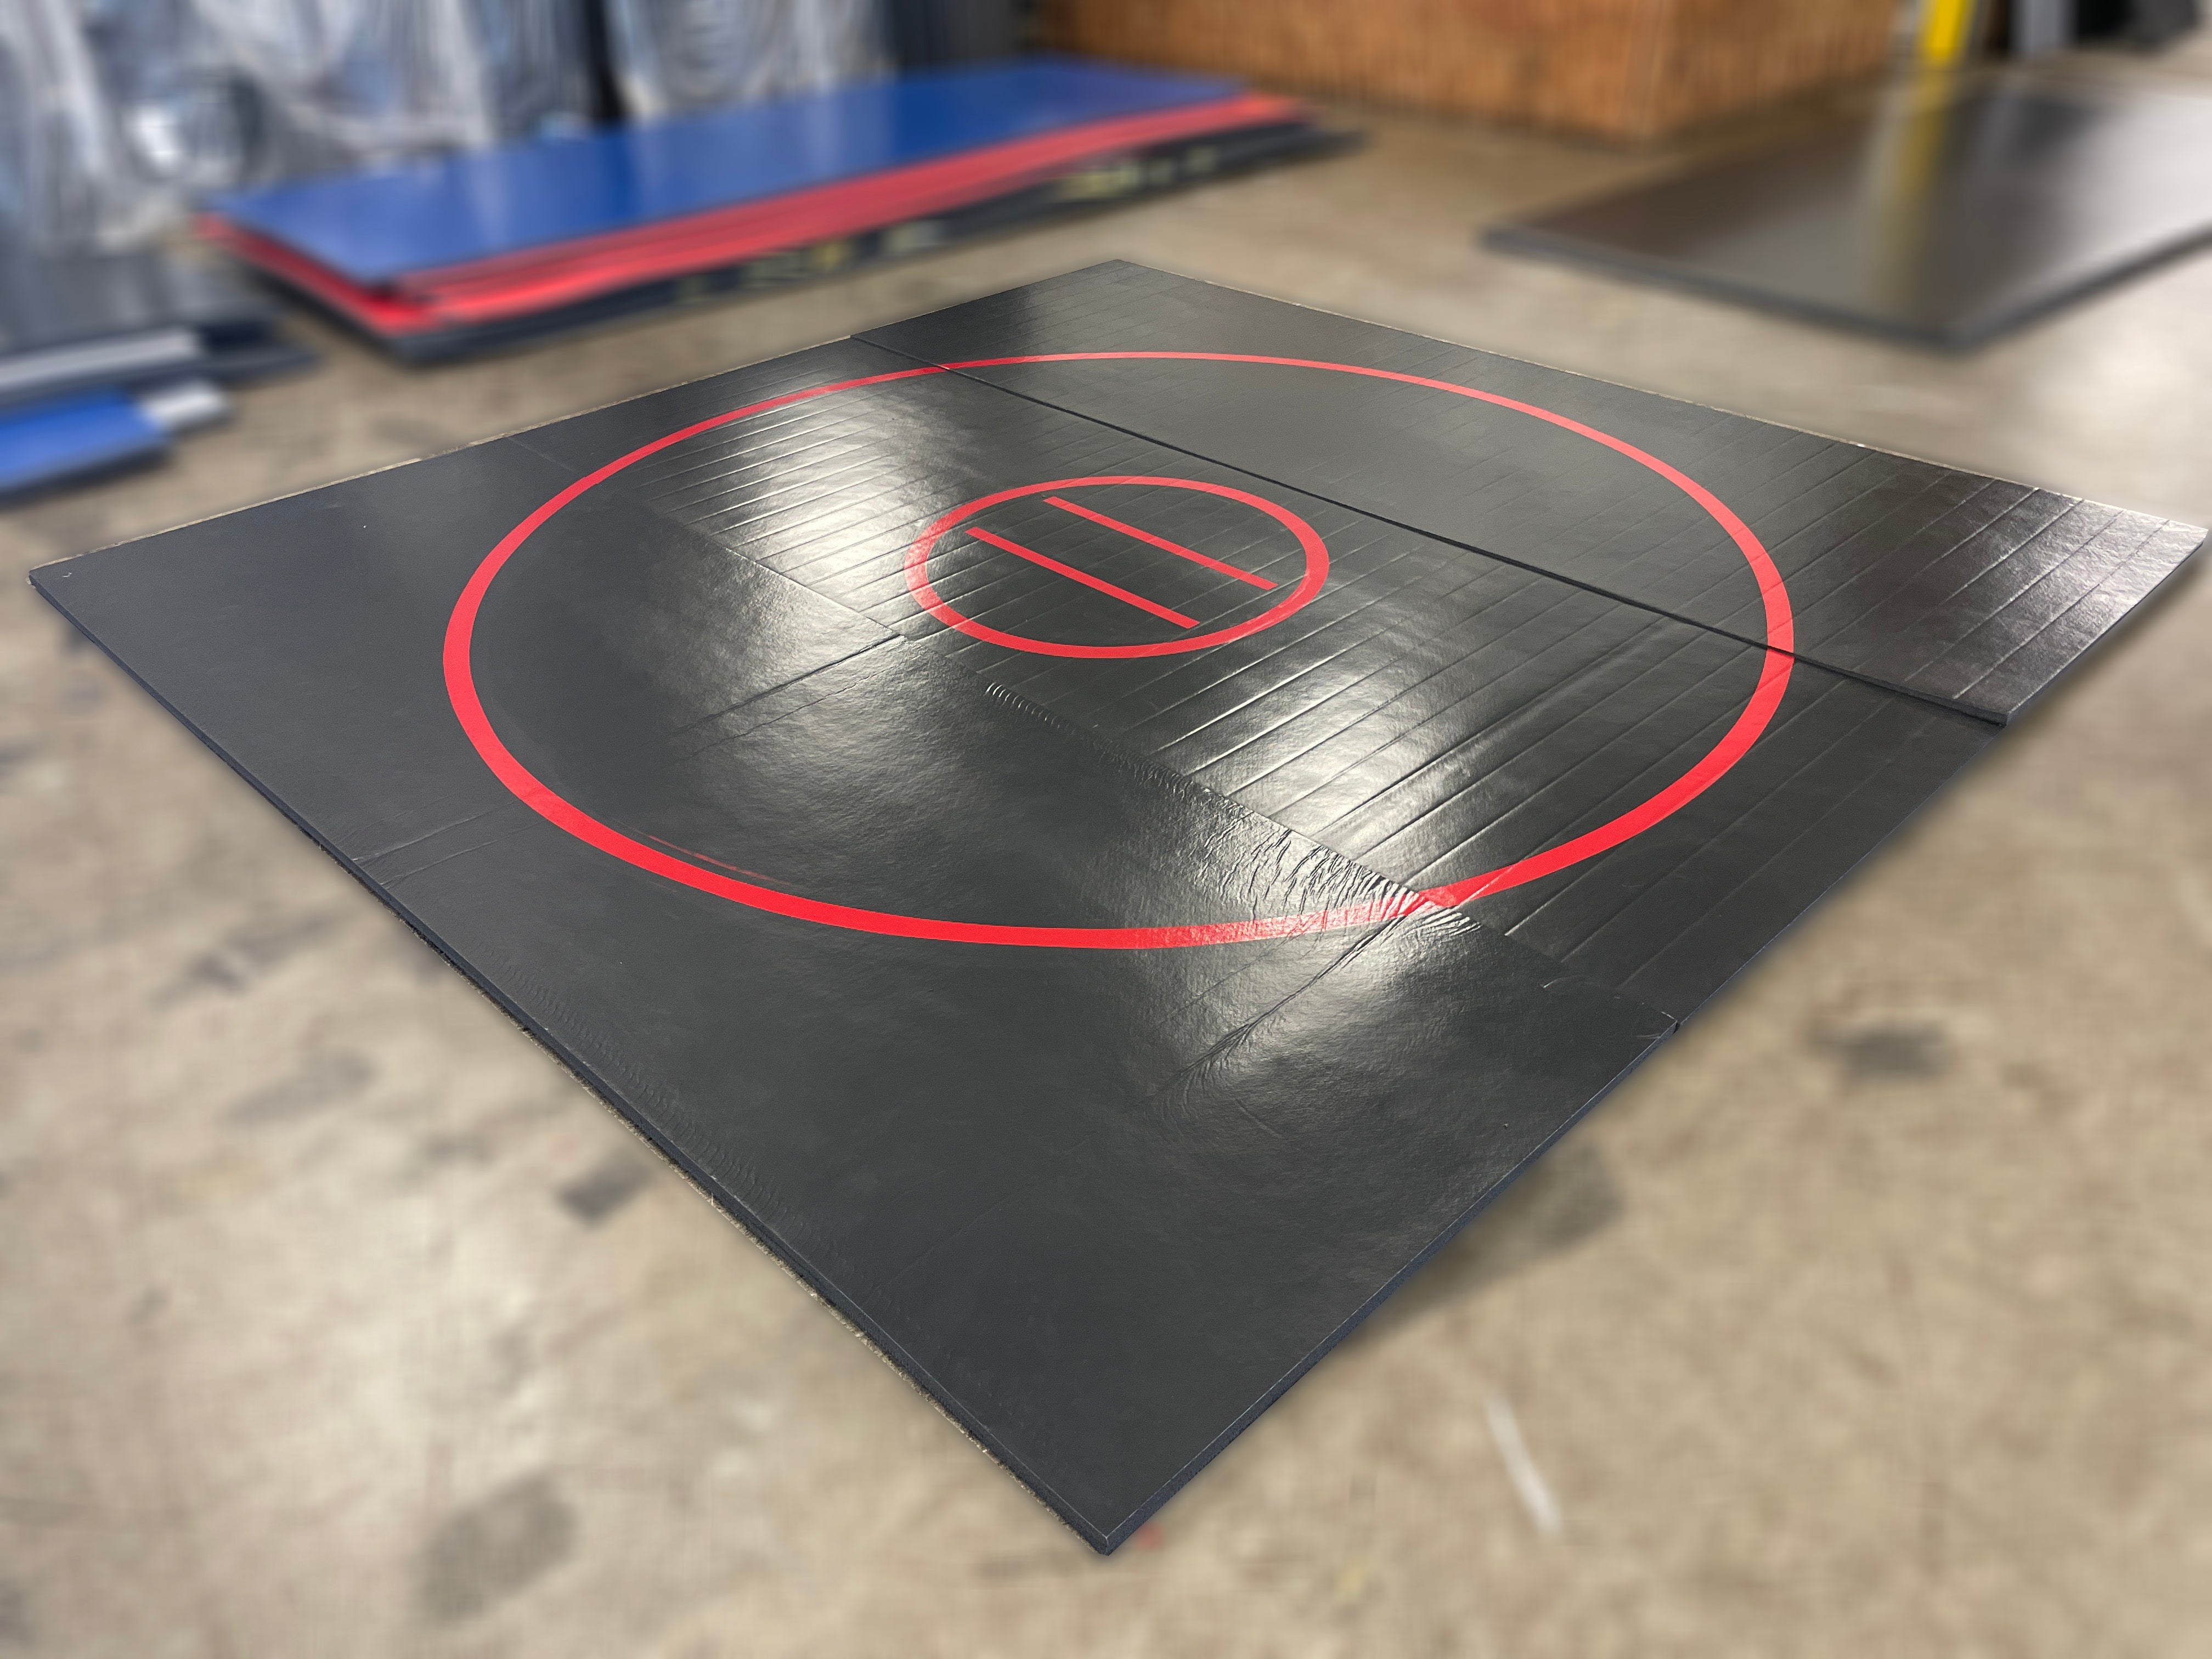 Clearance Wrestling Mat 12' x 12' x 1 3/8" Roll-Up Mat Black with Red Circles